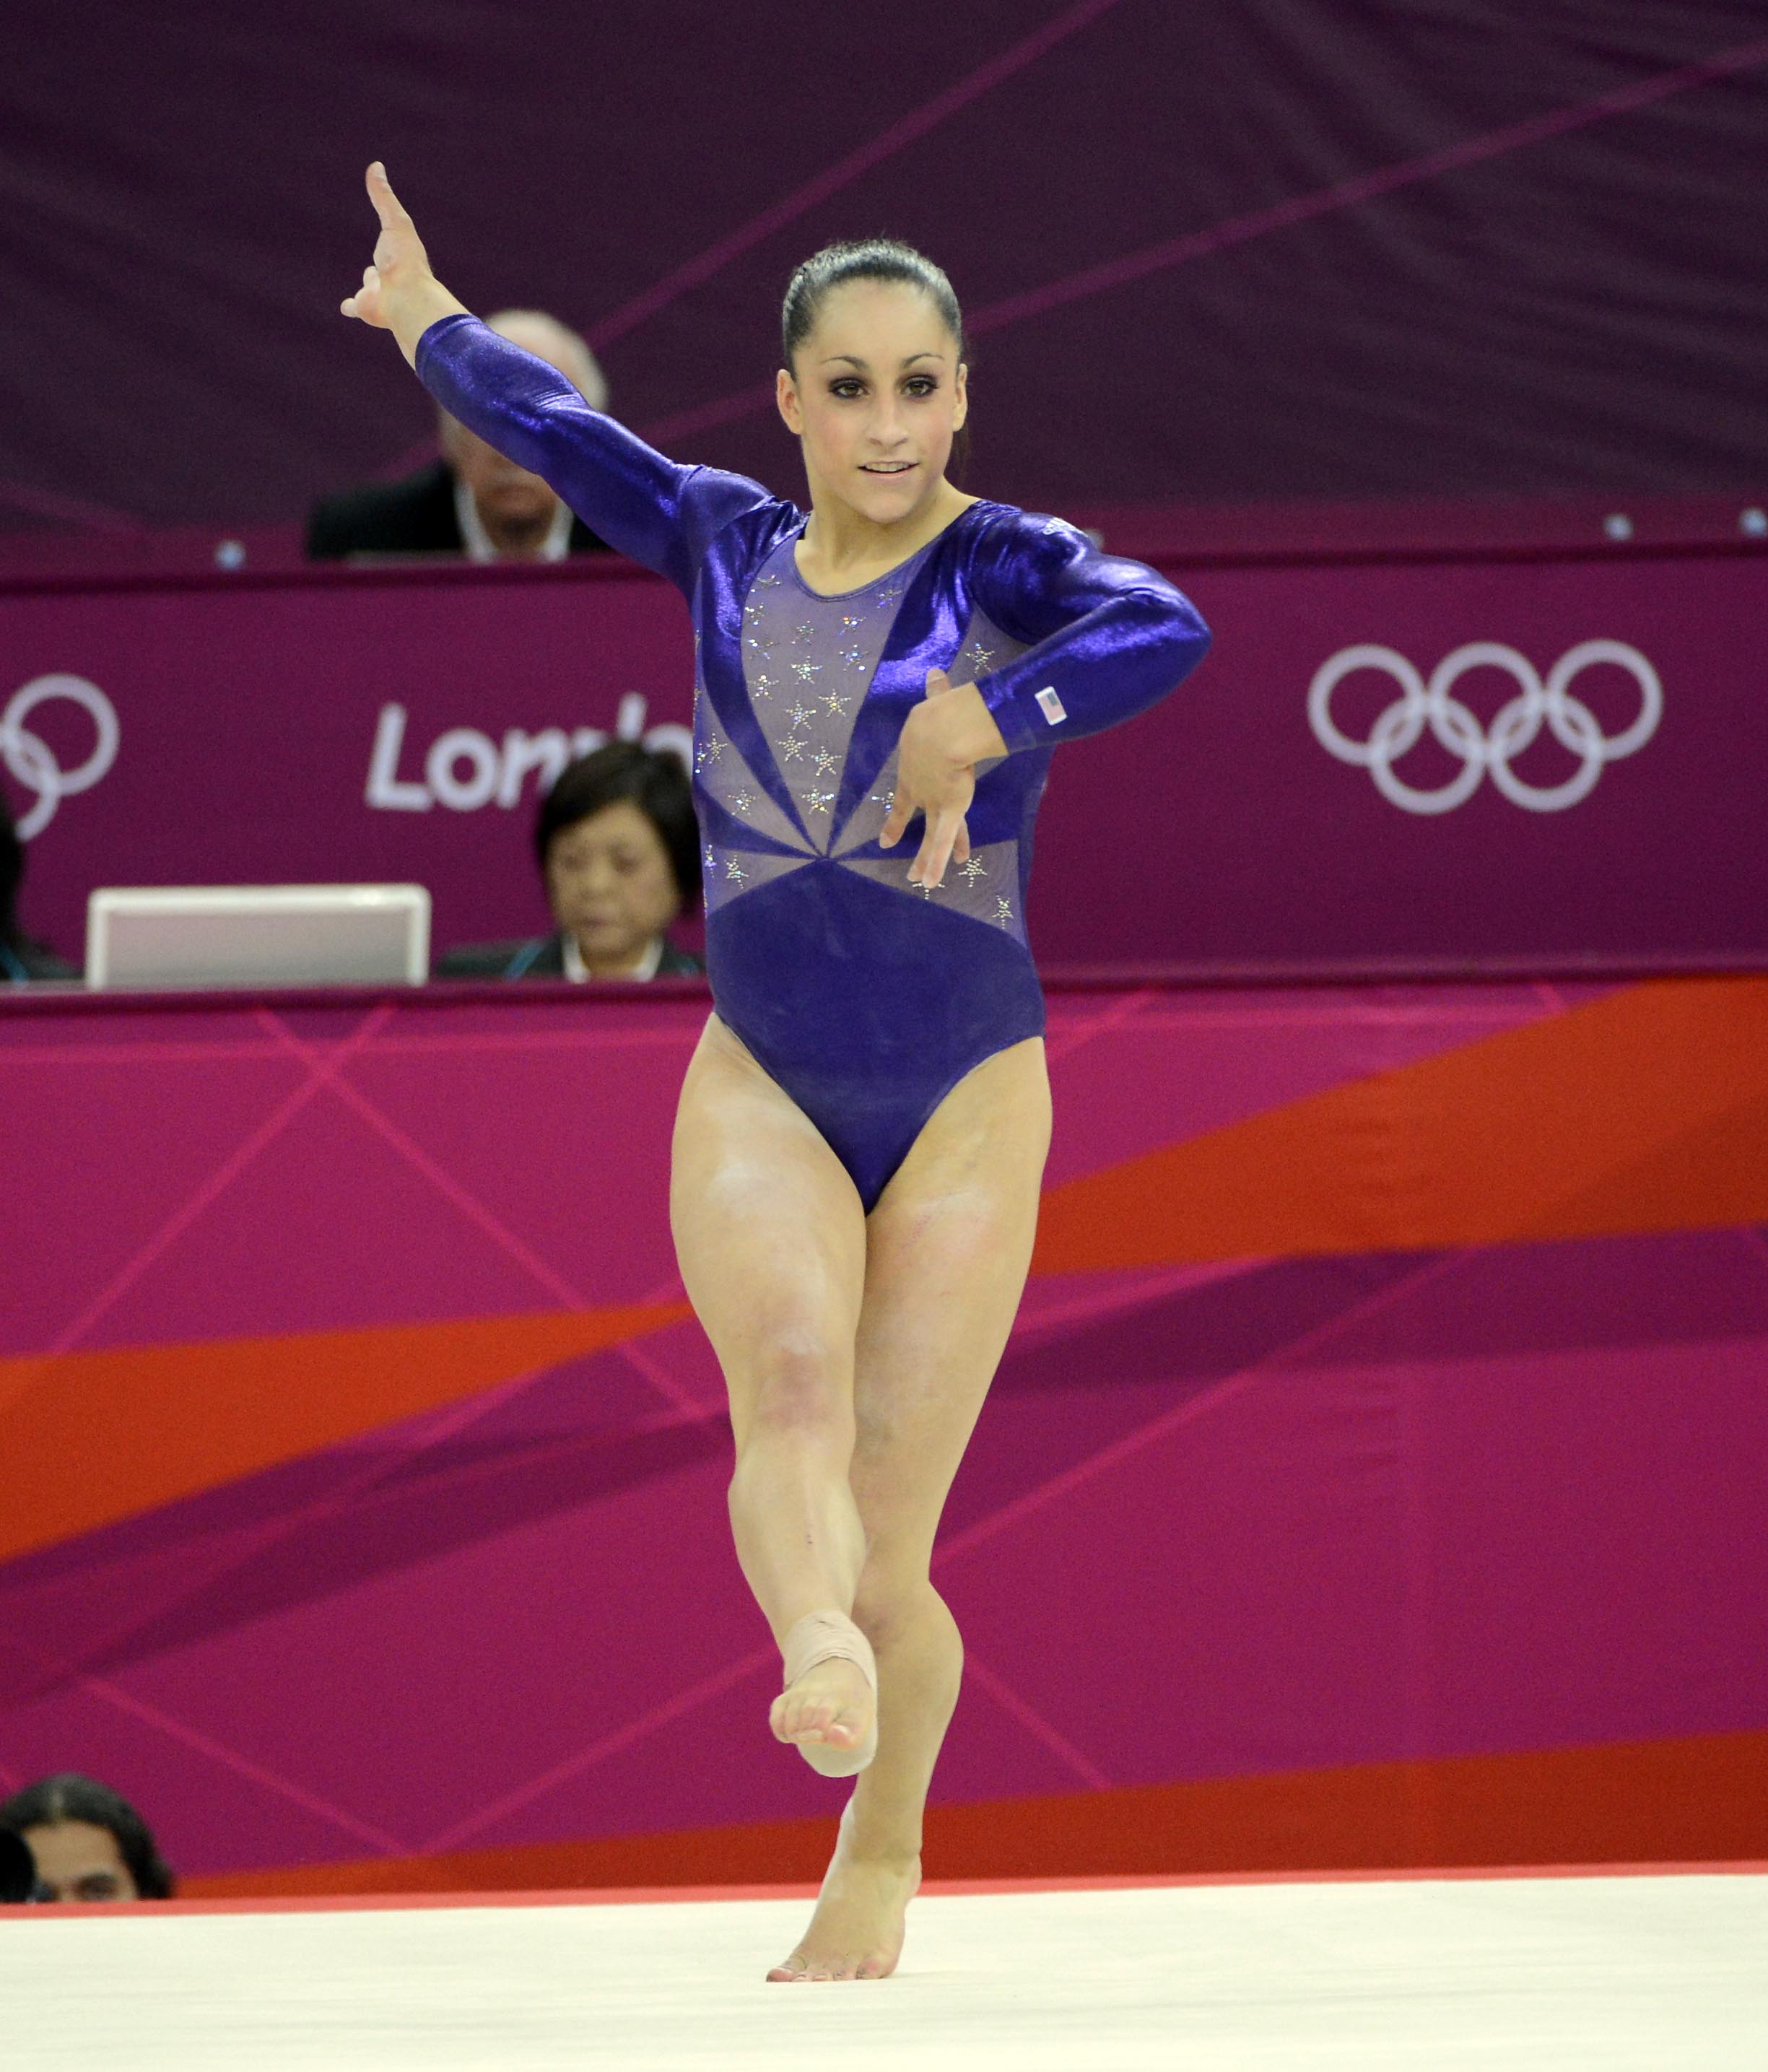 POLL: Favorite Leotards of the Past Two Olympic Games - FloGymnastics